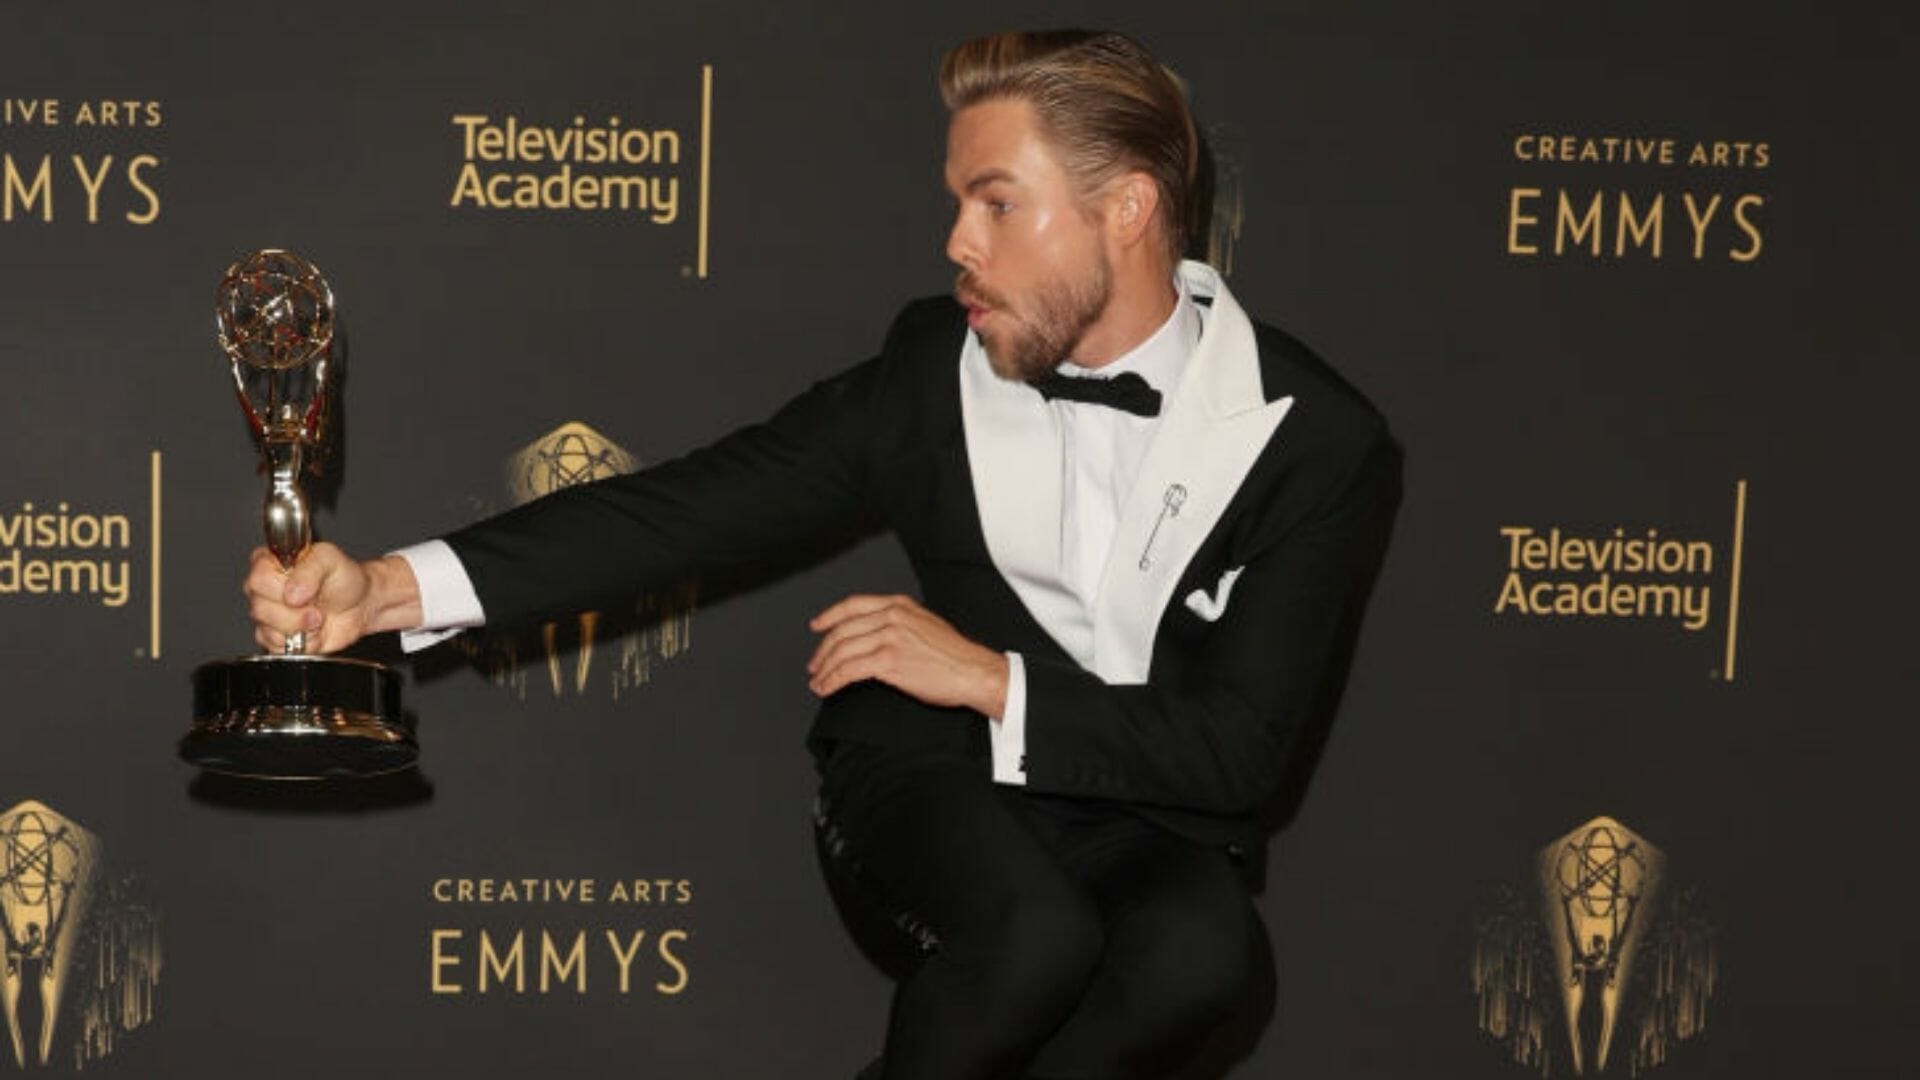 Derek Hough Wins Third Emmy for ‘Dancing with the Stars’ Choreography